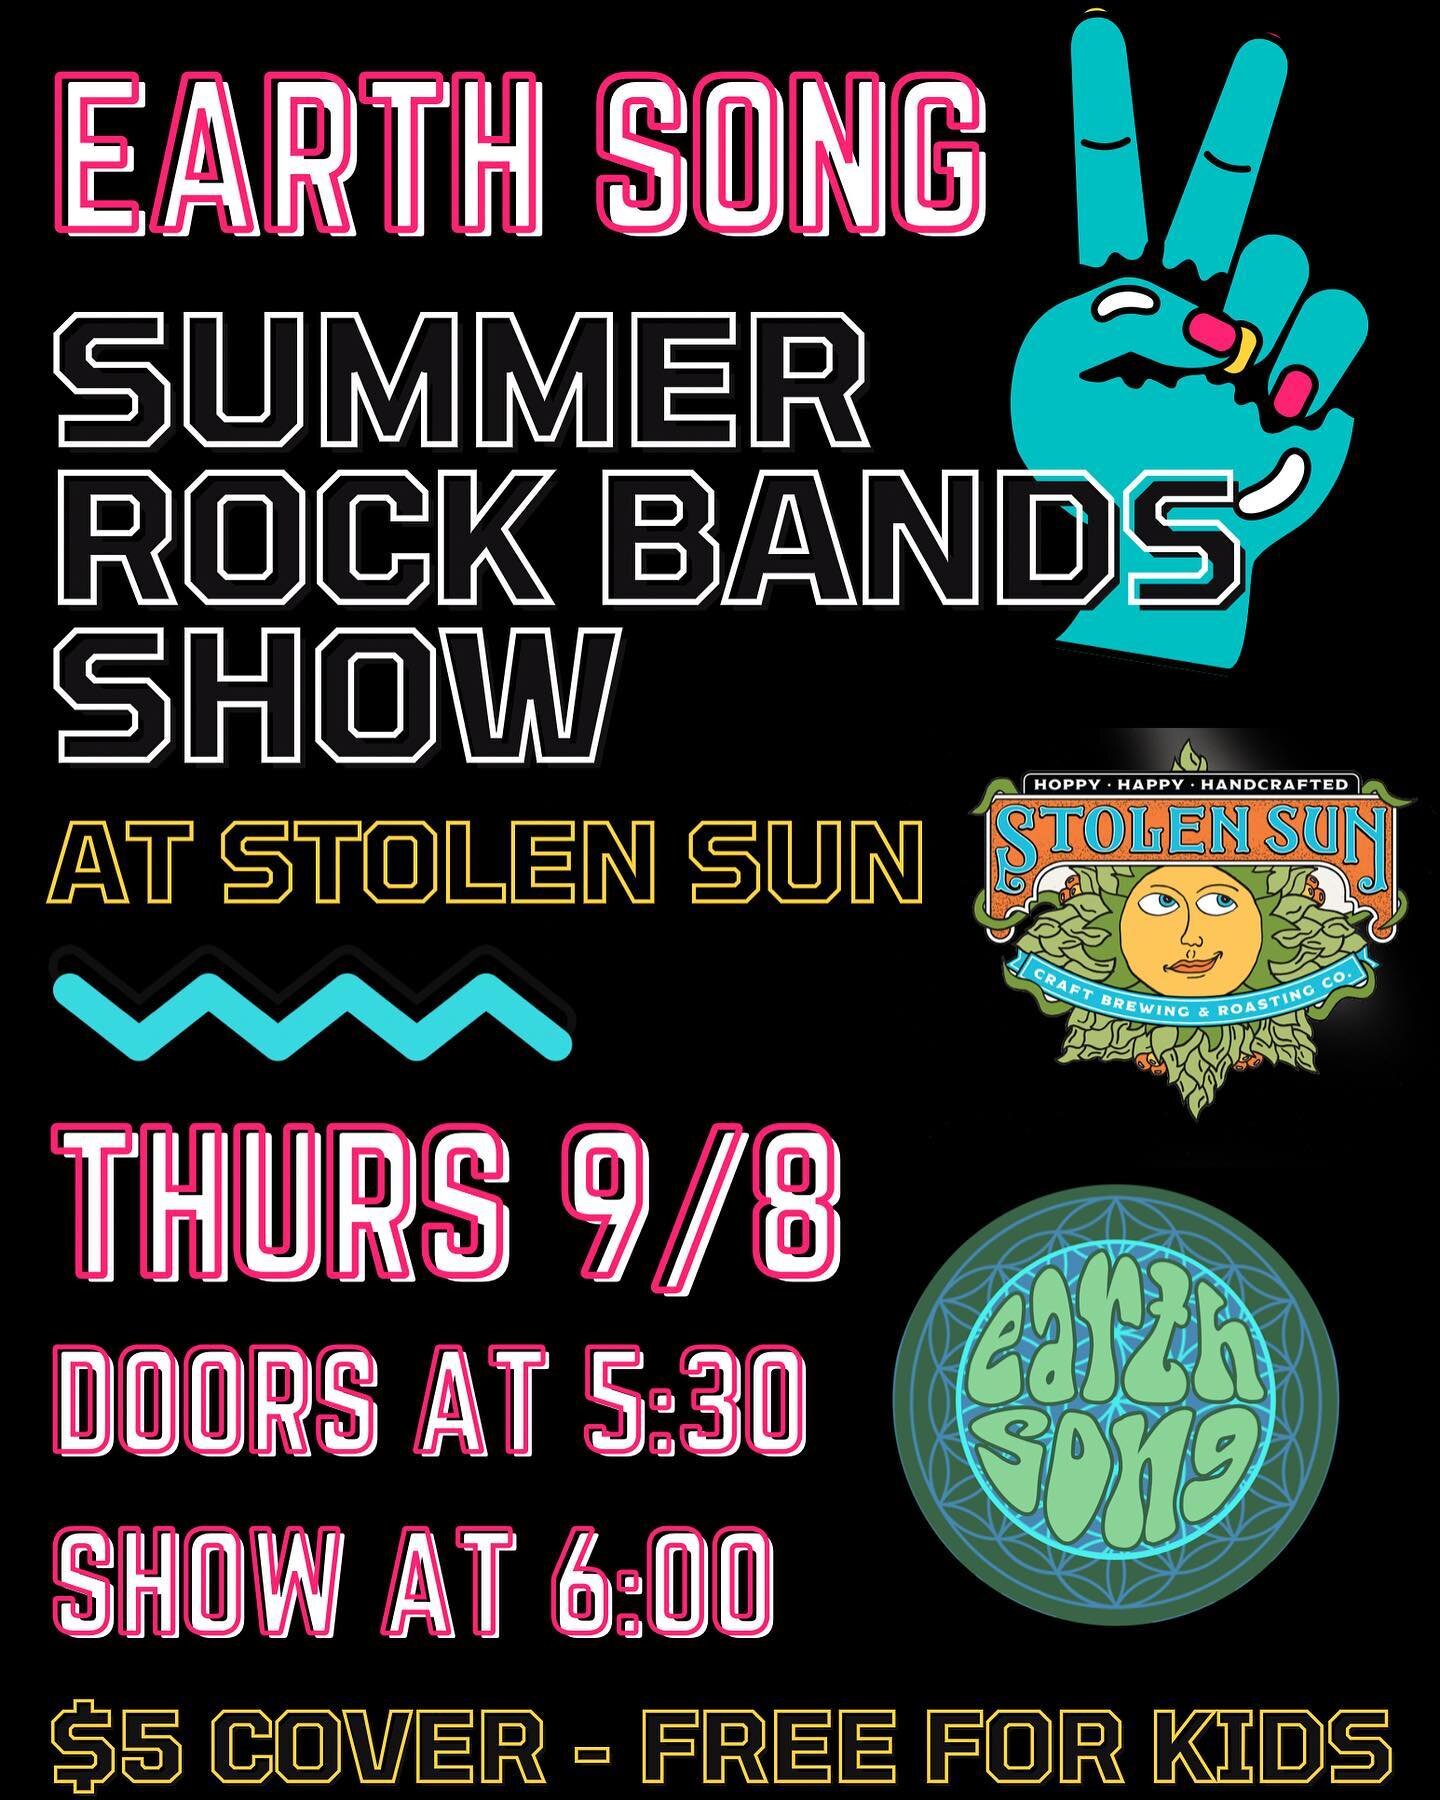 😎✌️Earth Song Summer Rock Bands at @stolensunbrew featuring:

@totfroggods 
Anderson Council
@5_degrees_of_monday 
Sewer Wooder
Lost Cause
The Deathly Hallows 

🎸 Doors at 5:30, show at 6

🎶 $5 cover for adults at the door, free for kids 

☎️ Rese